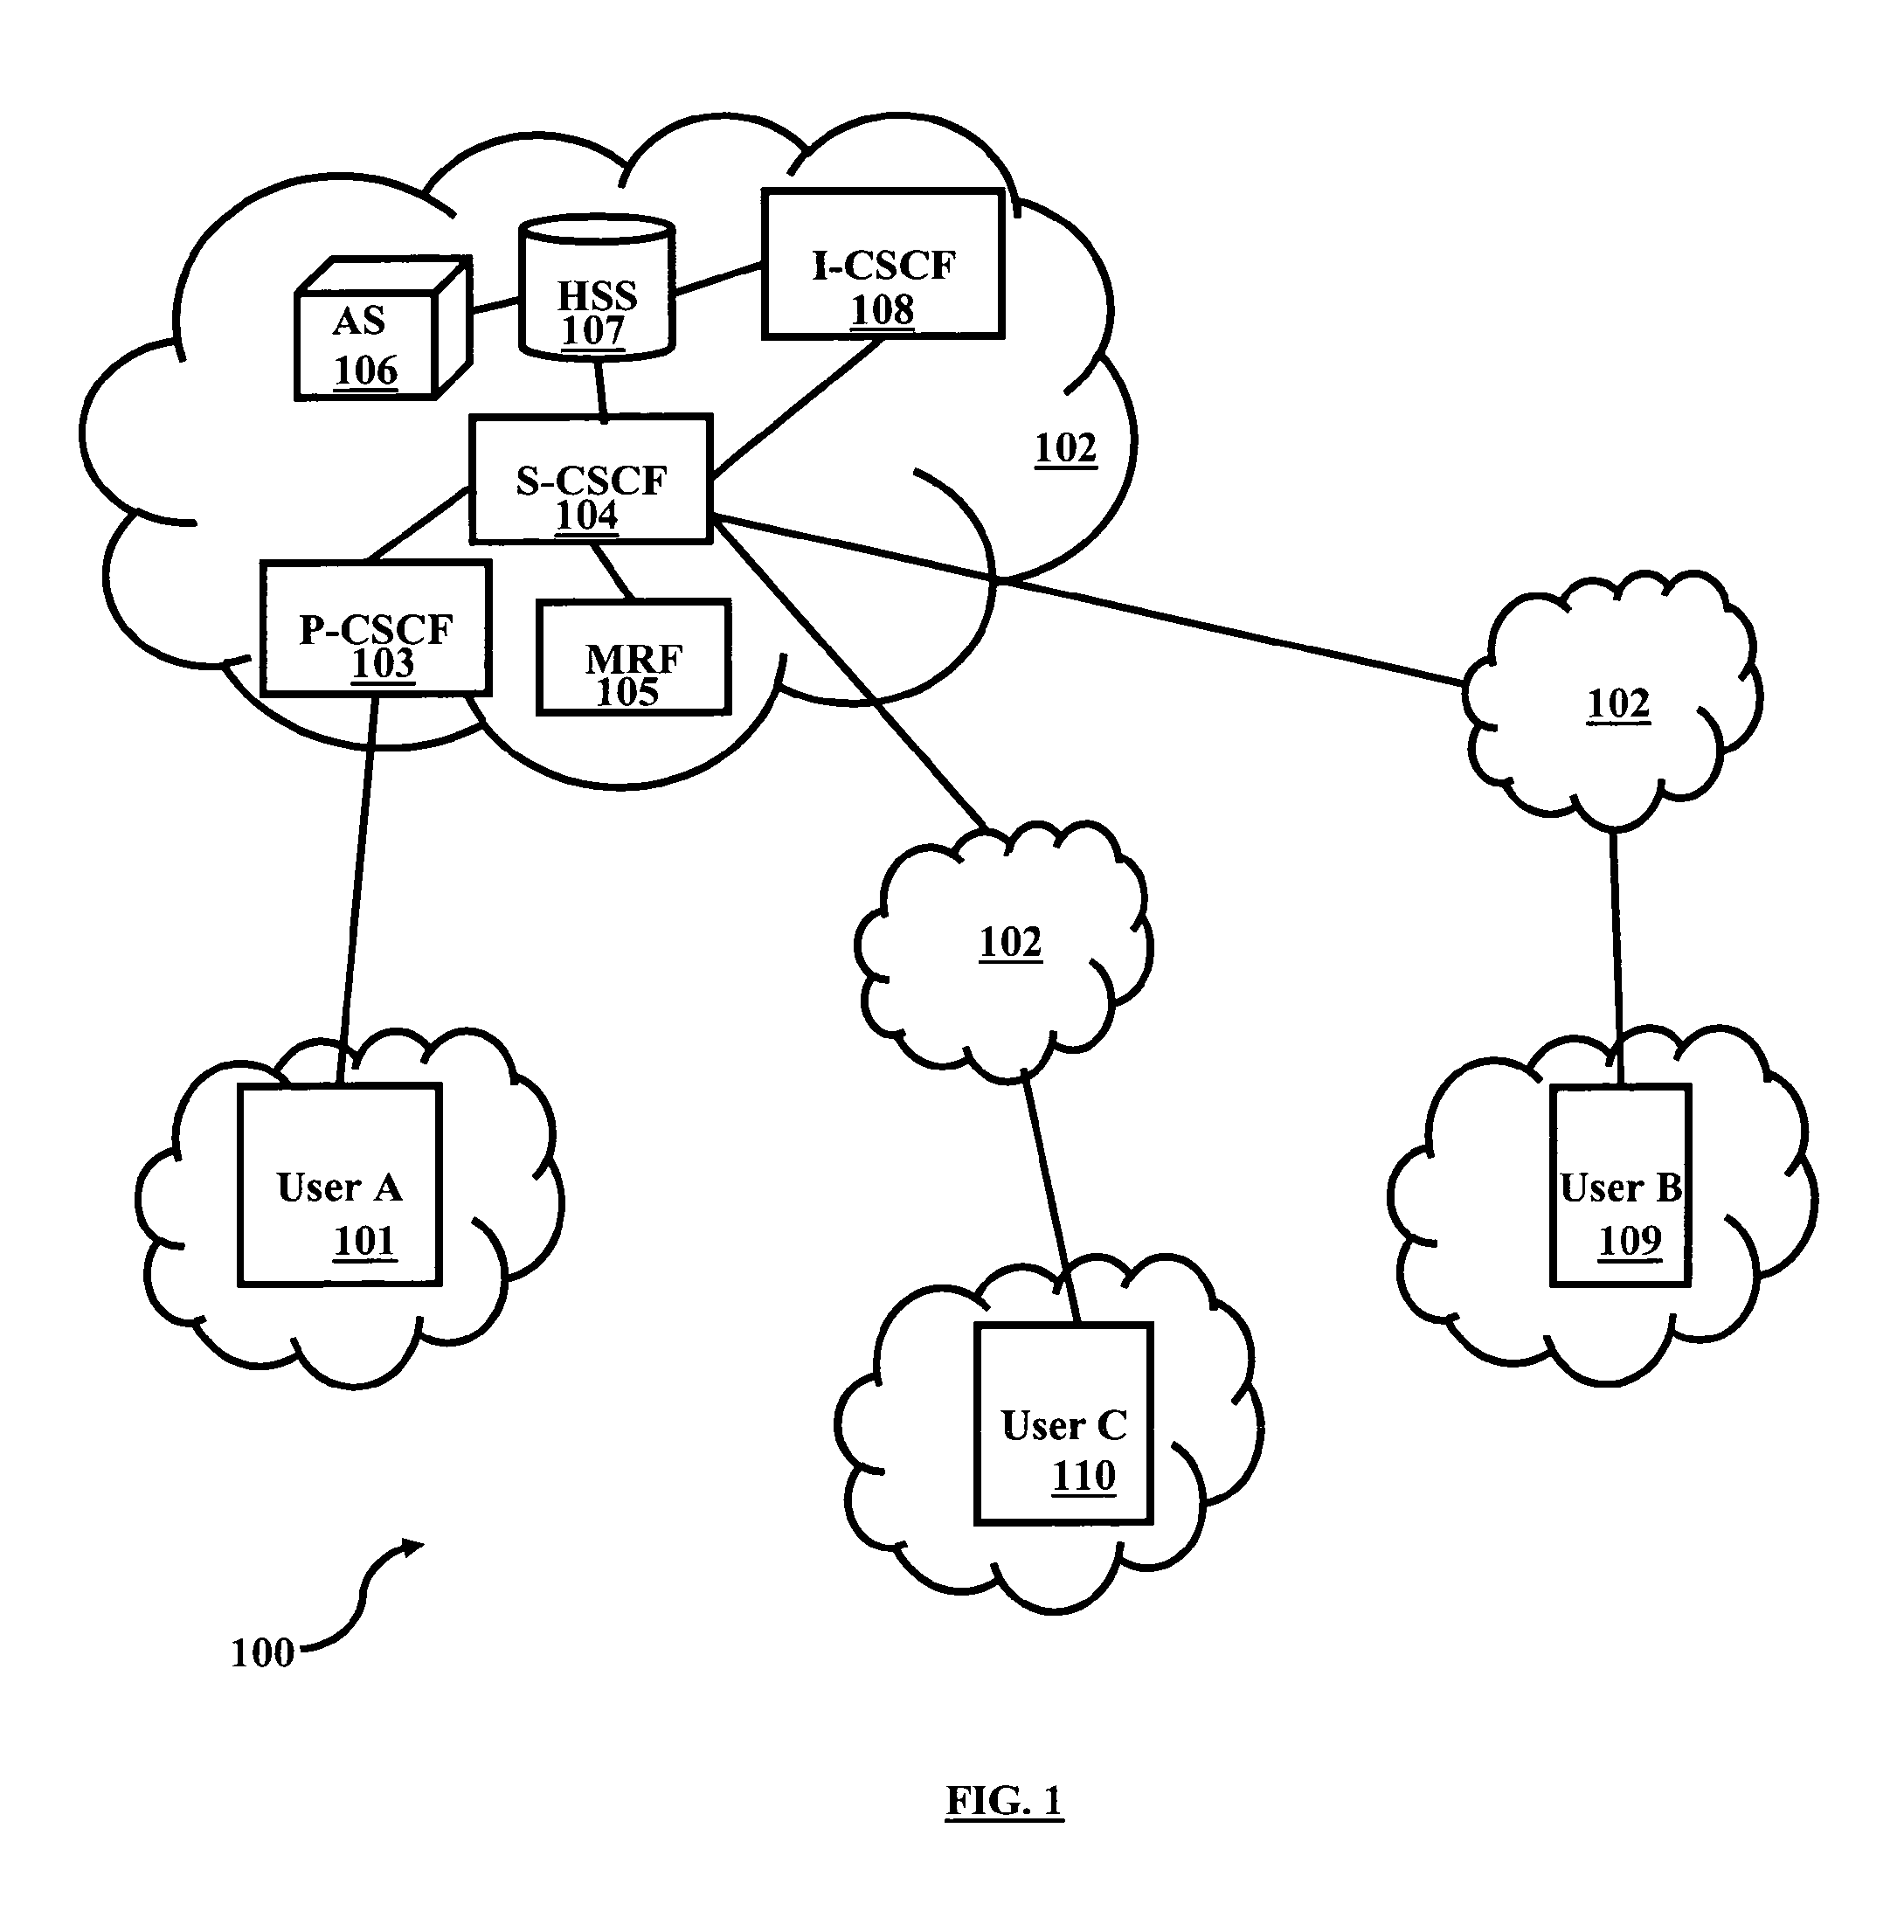 Method and system for selective call forwarding based on media attributes in telecommunication network